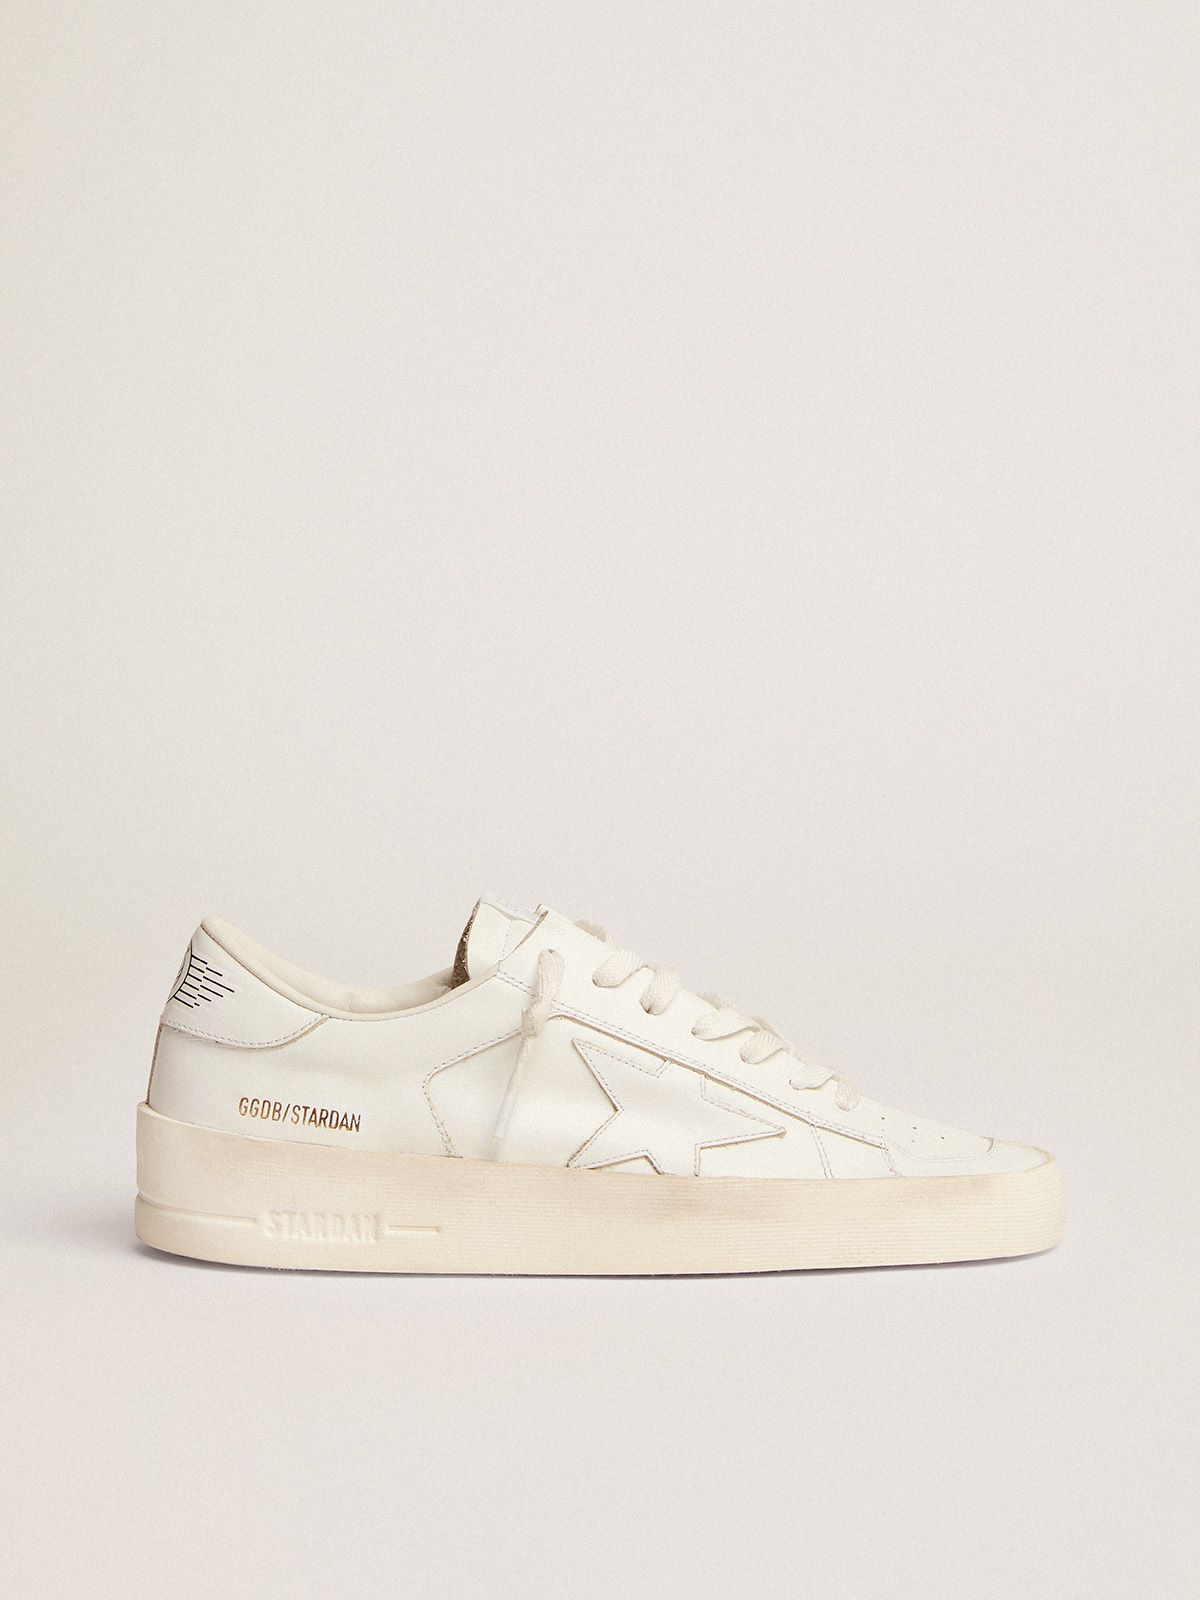 golden goose white in sneakers Stardan leather total